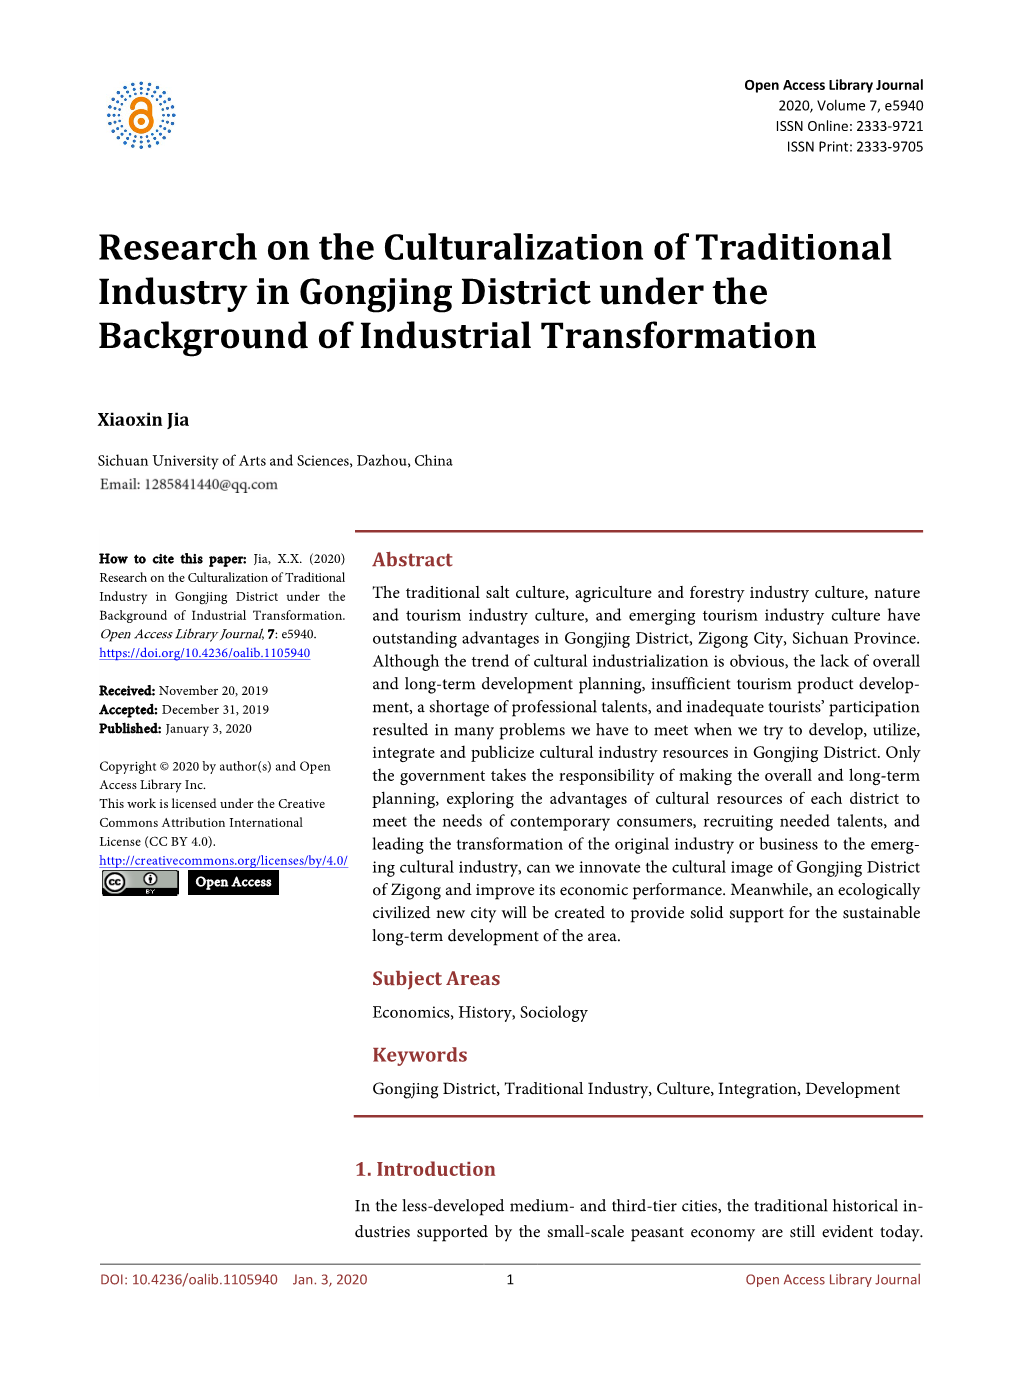 Research on the Culturalization of Traditional Industry in Gongjing District Under the Background of Industrial Transformation